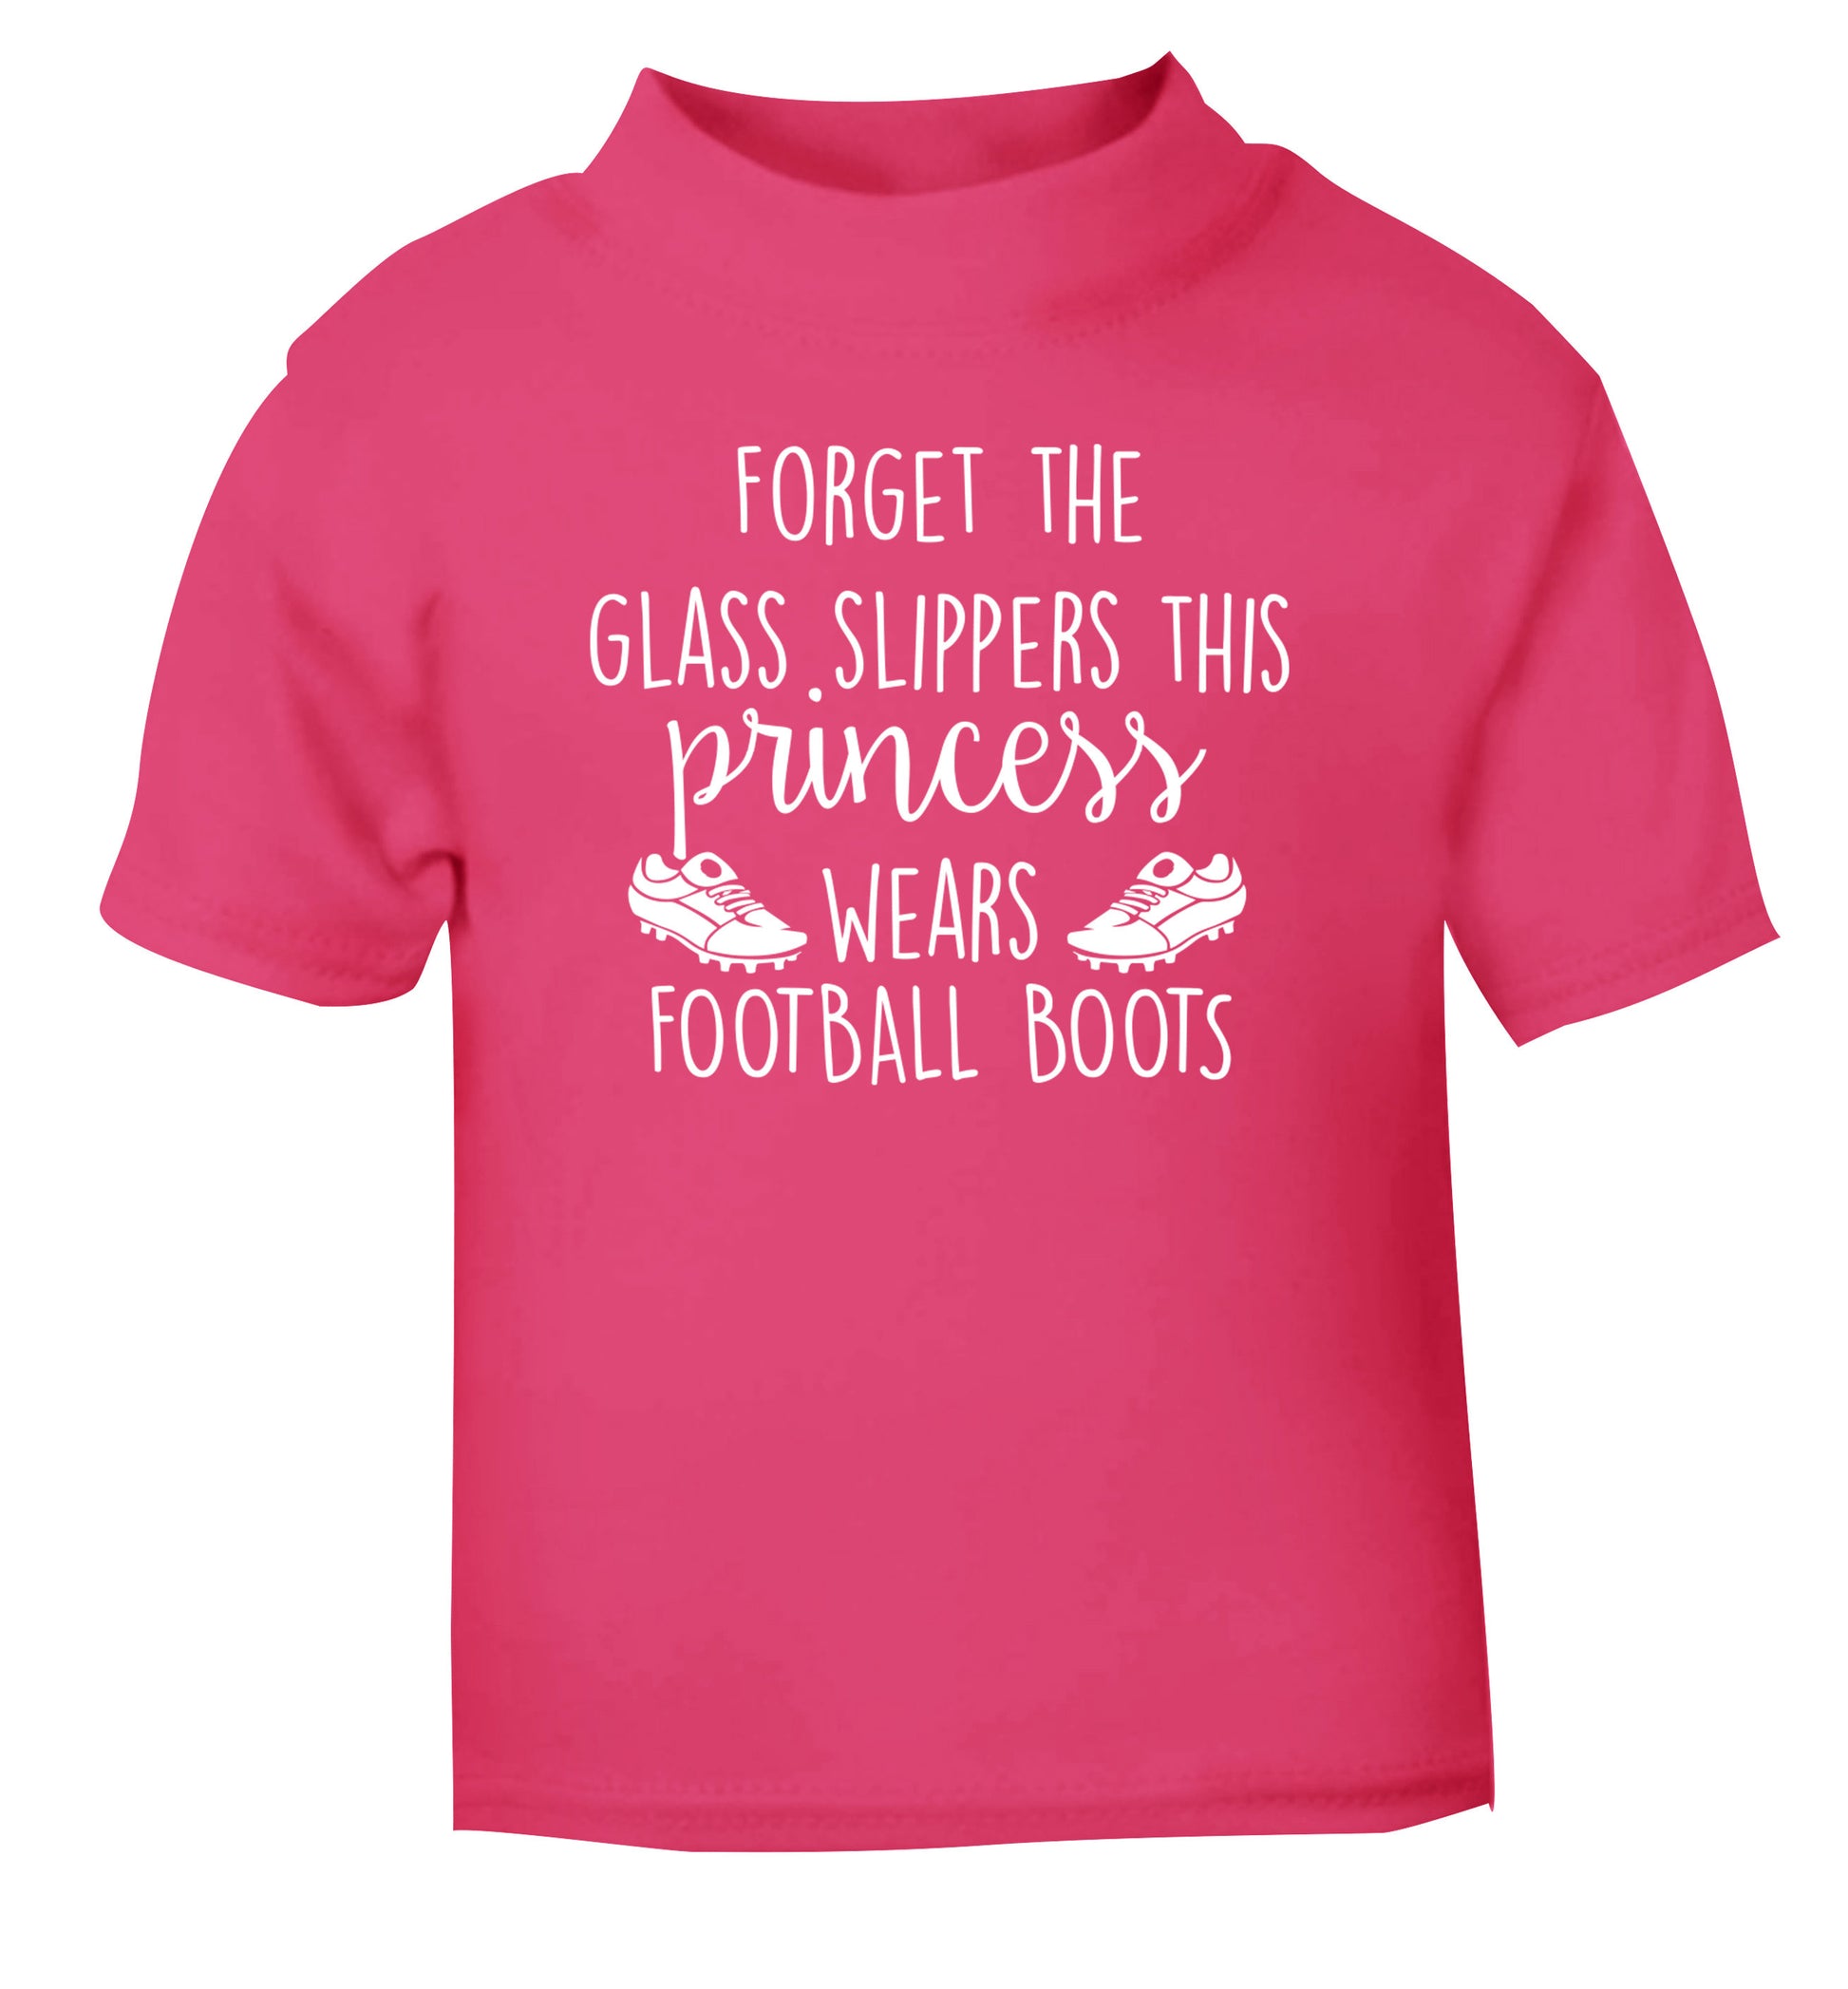 Forget the glass slippers this princess wears football boots pink Baby Toddler Tshirt 2 Years